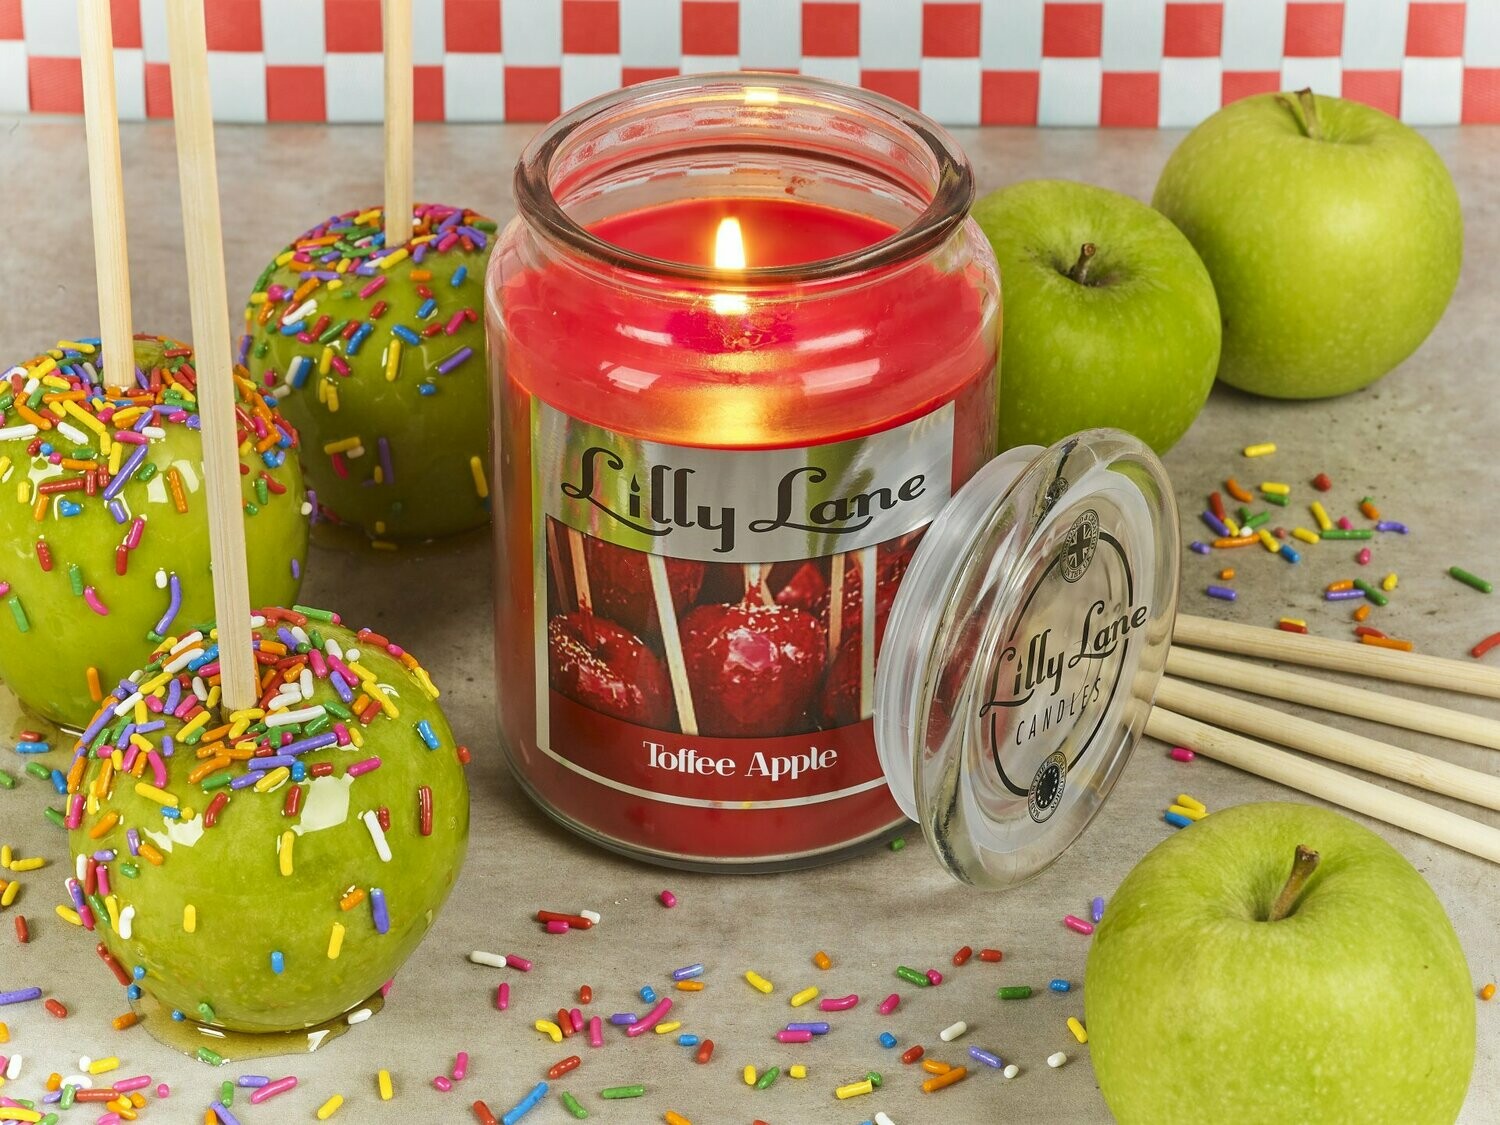 Lilly Lane Toffee Apple 18oz Jar Candle